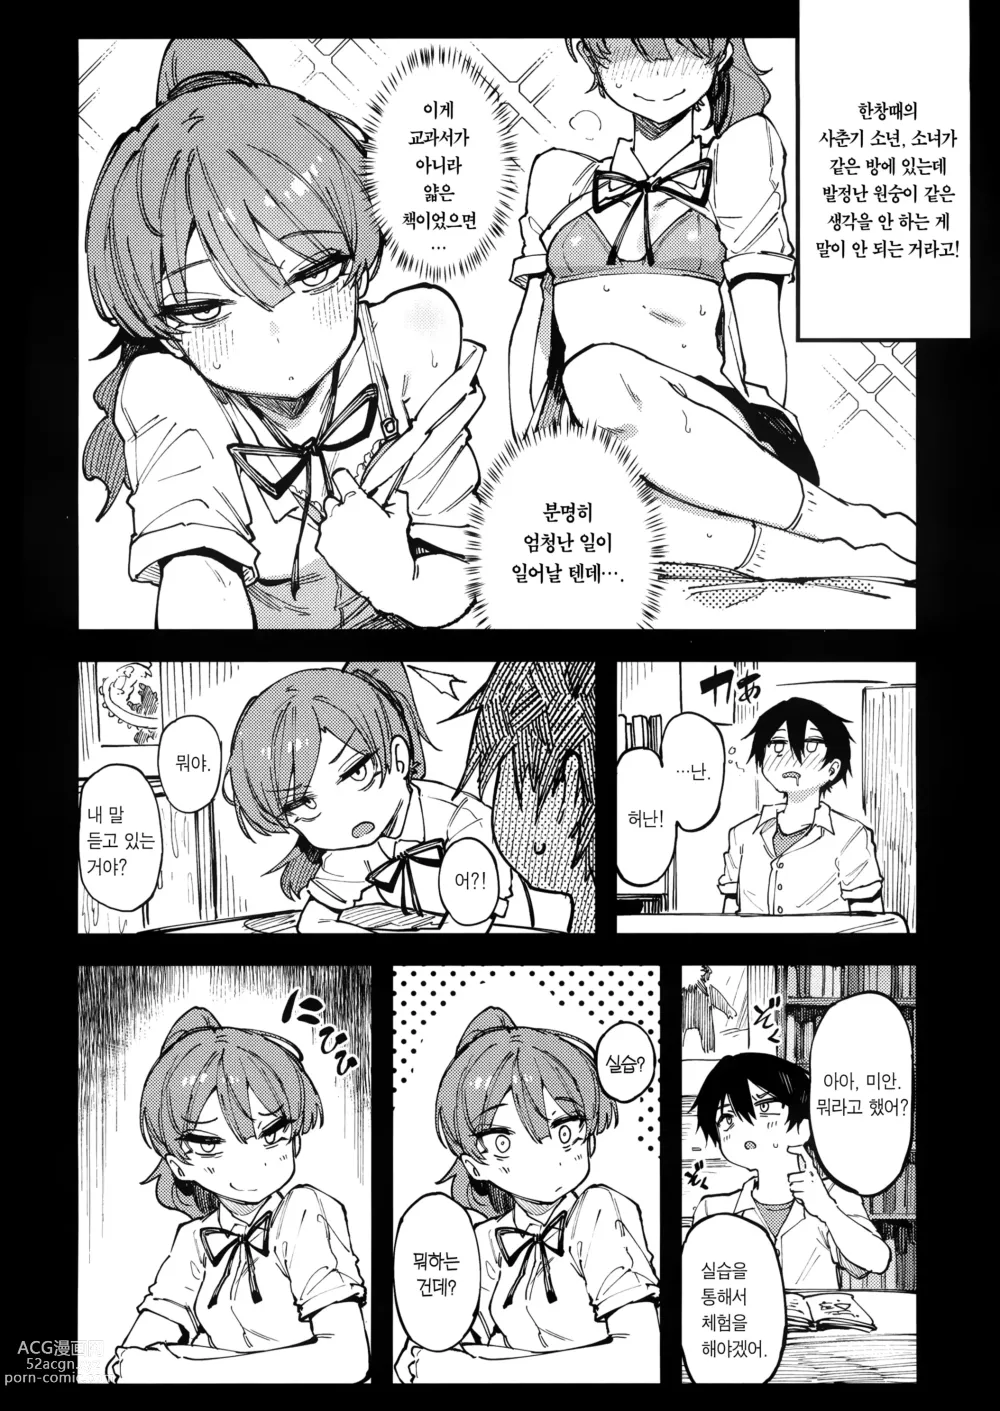 Page 6 of doujinshi 수학 1 상 (decensored)